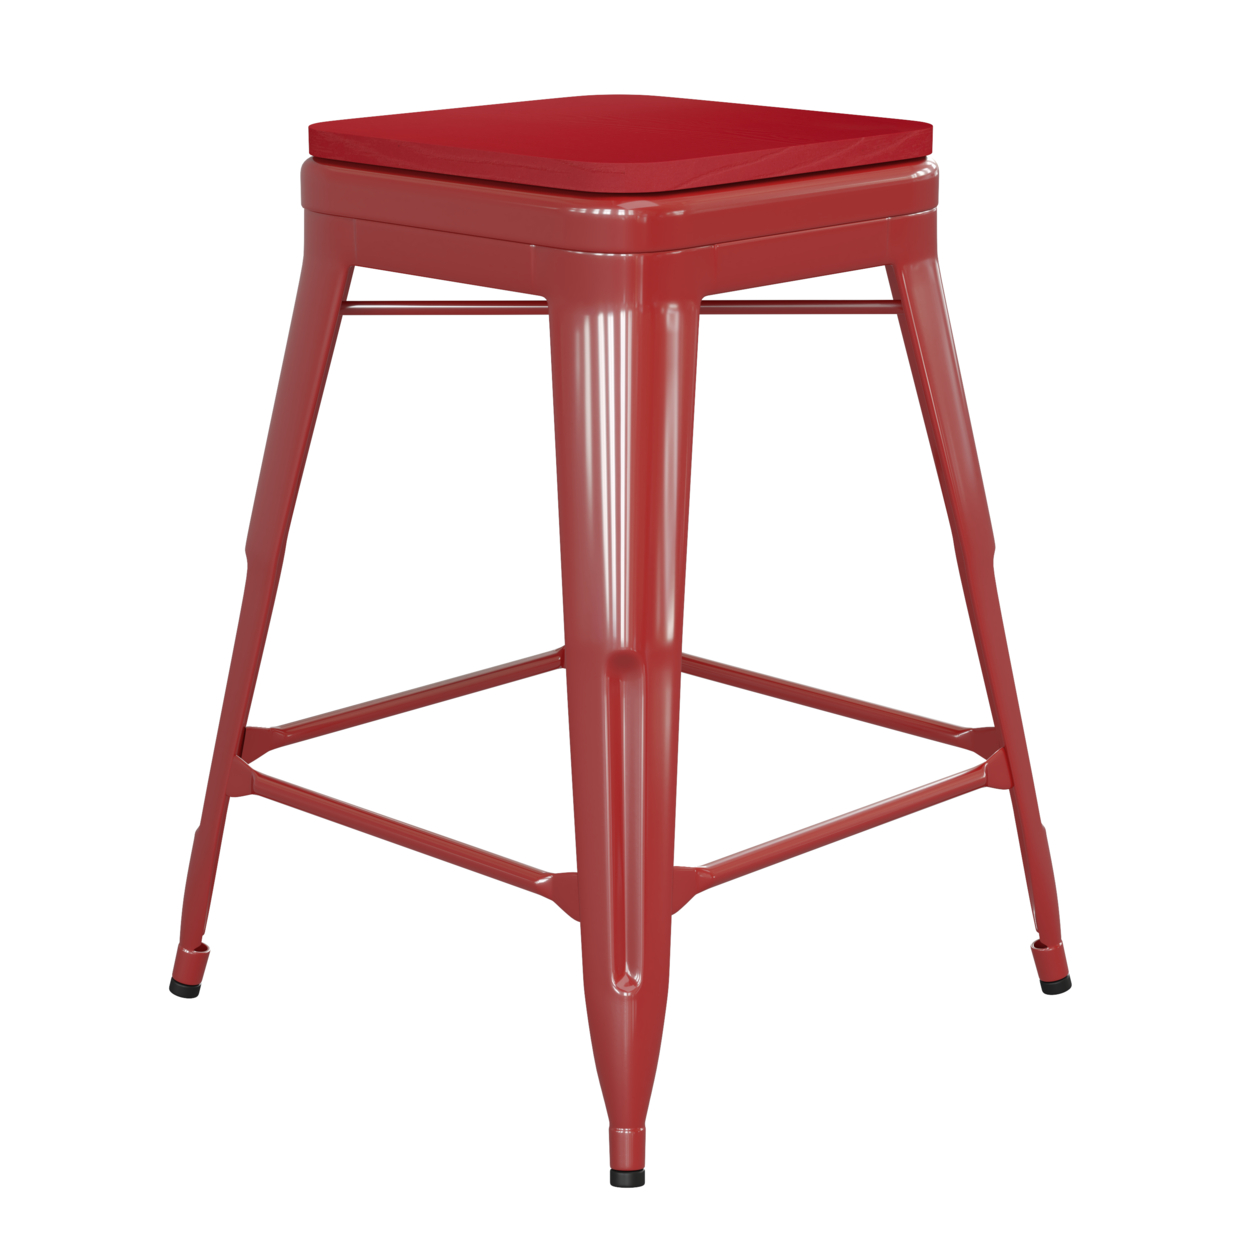 24 Inch Metal Stool, Thick Wood Seat, Dark Red